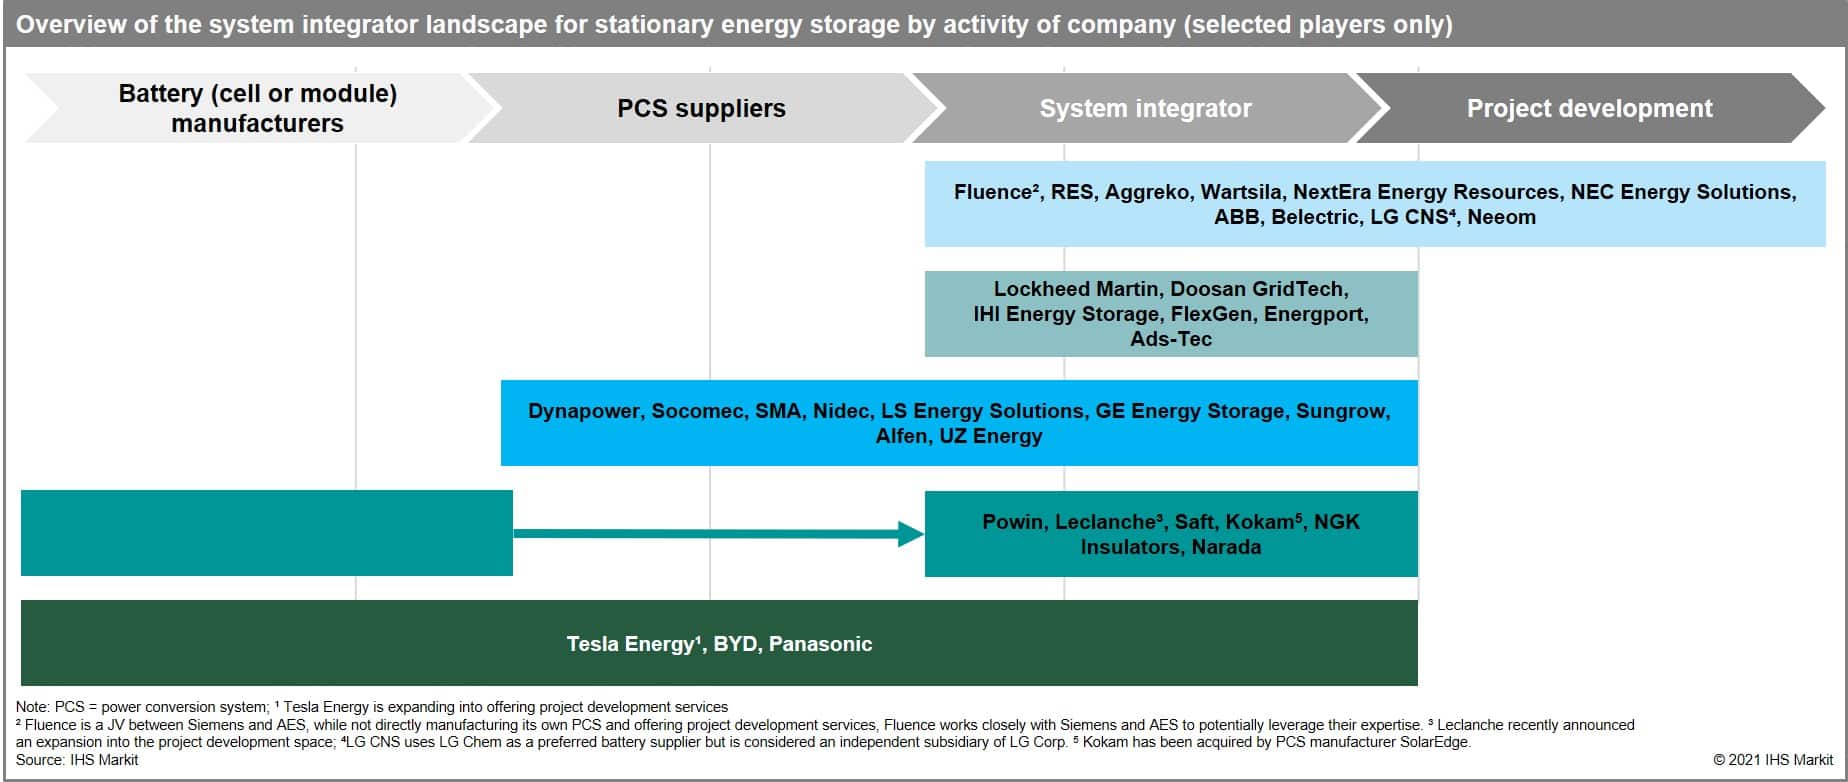 Overview of the system integrator landscape for stationary energy storage by activity of company (selected players only)